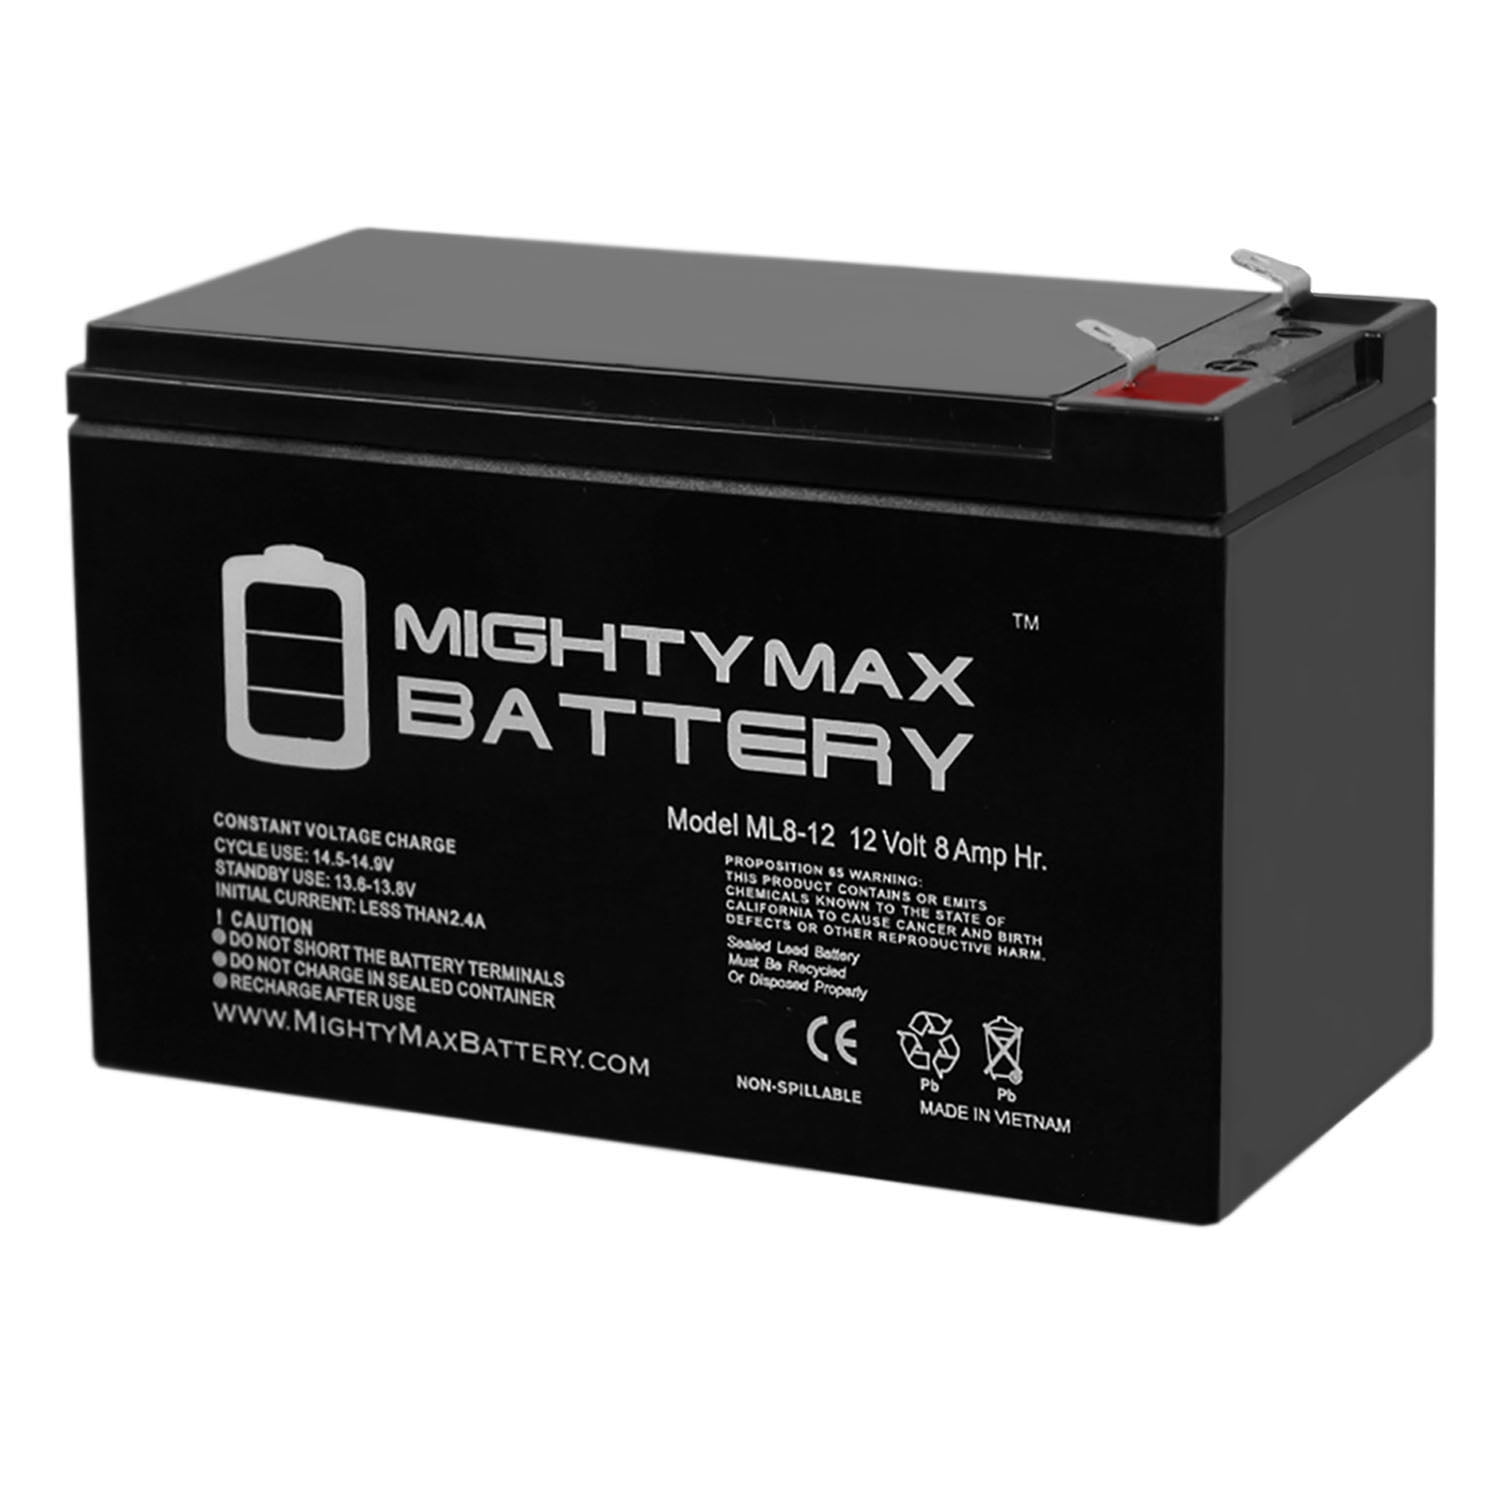 Mighty Max Battery 12V 8Ah para Systems-Minuteman Entrust ETR700 ETR700p15 Battery 4 Pack Brand Product 